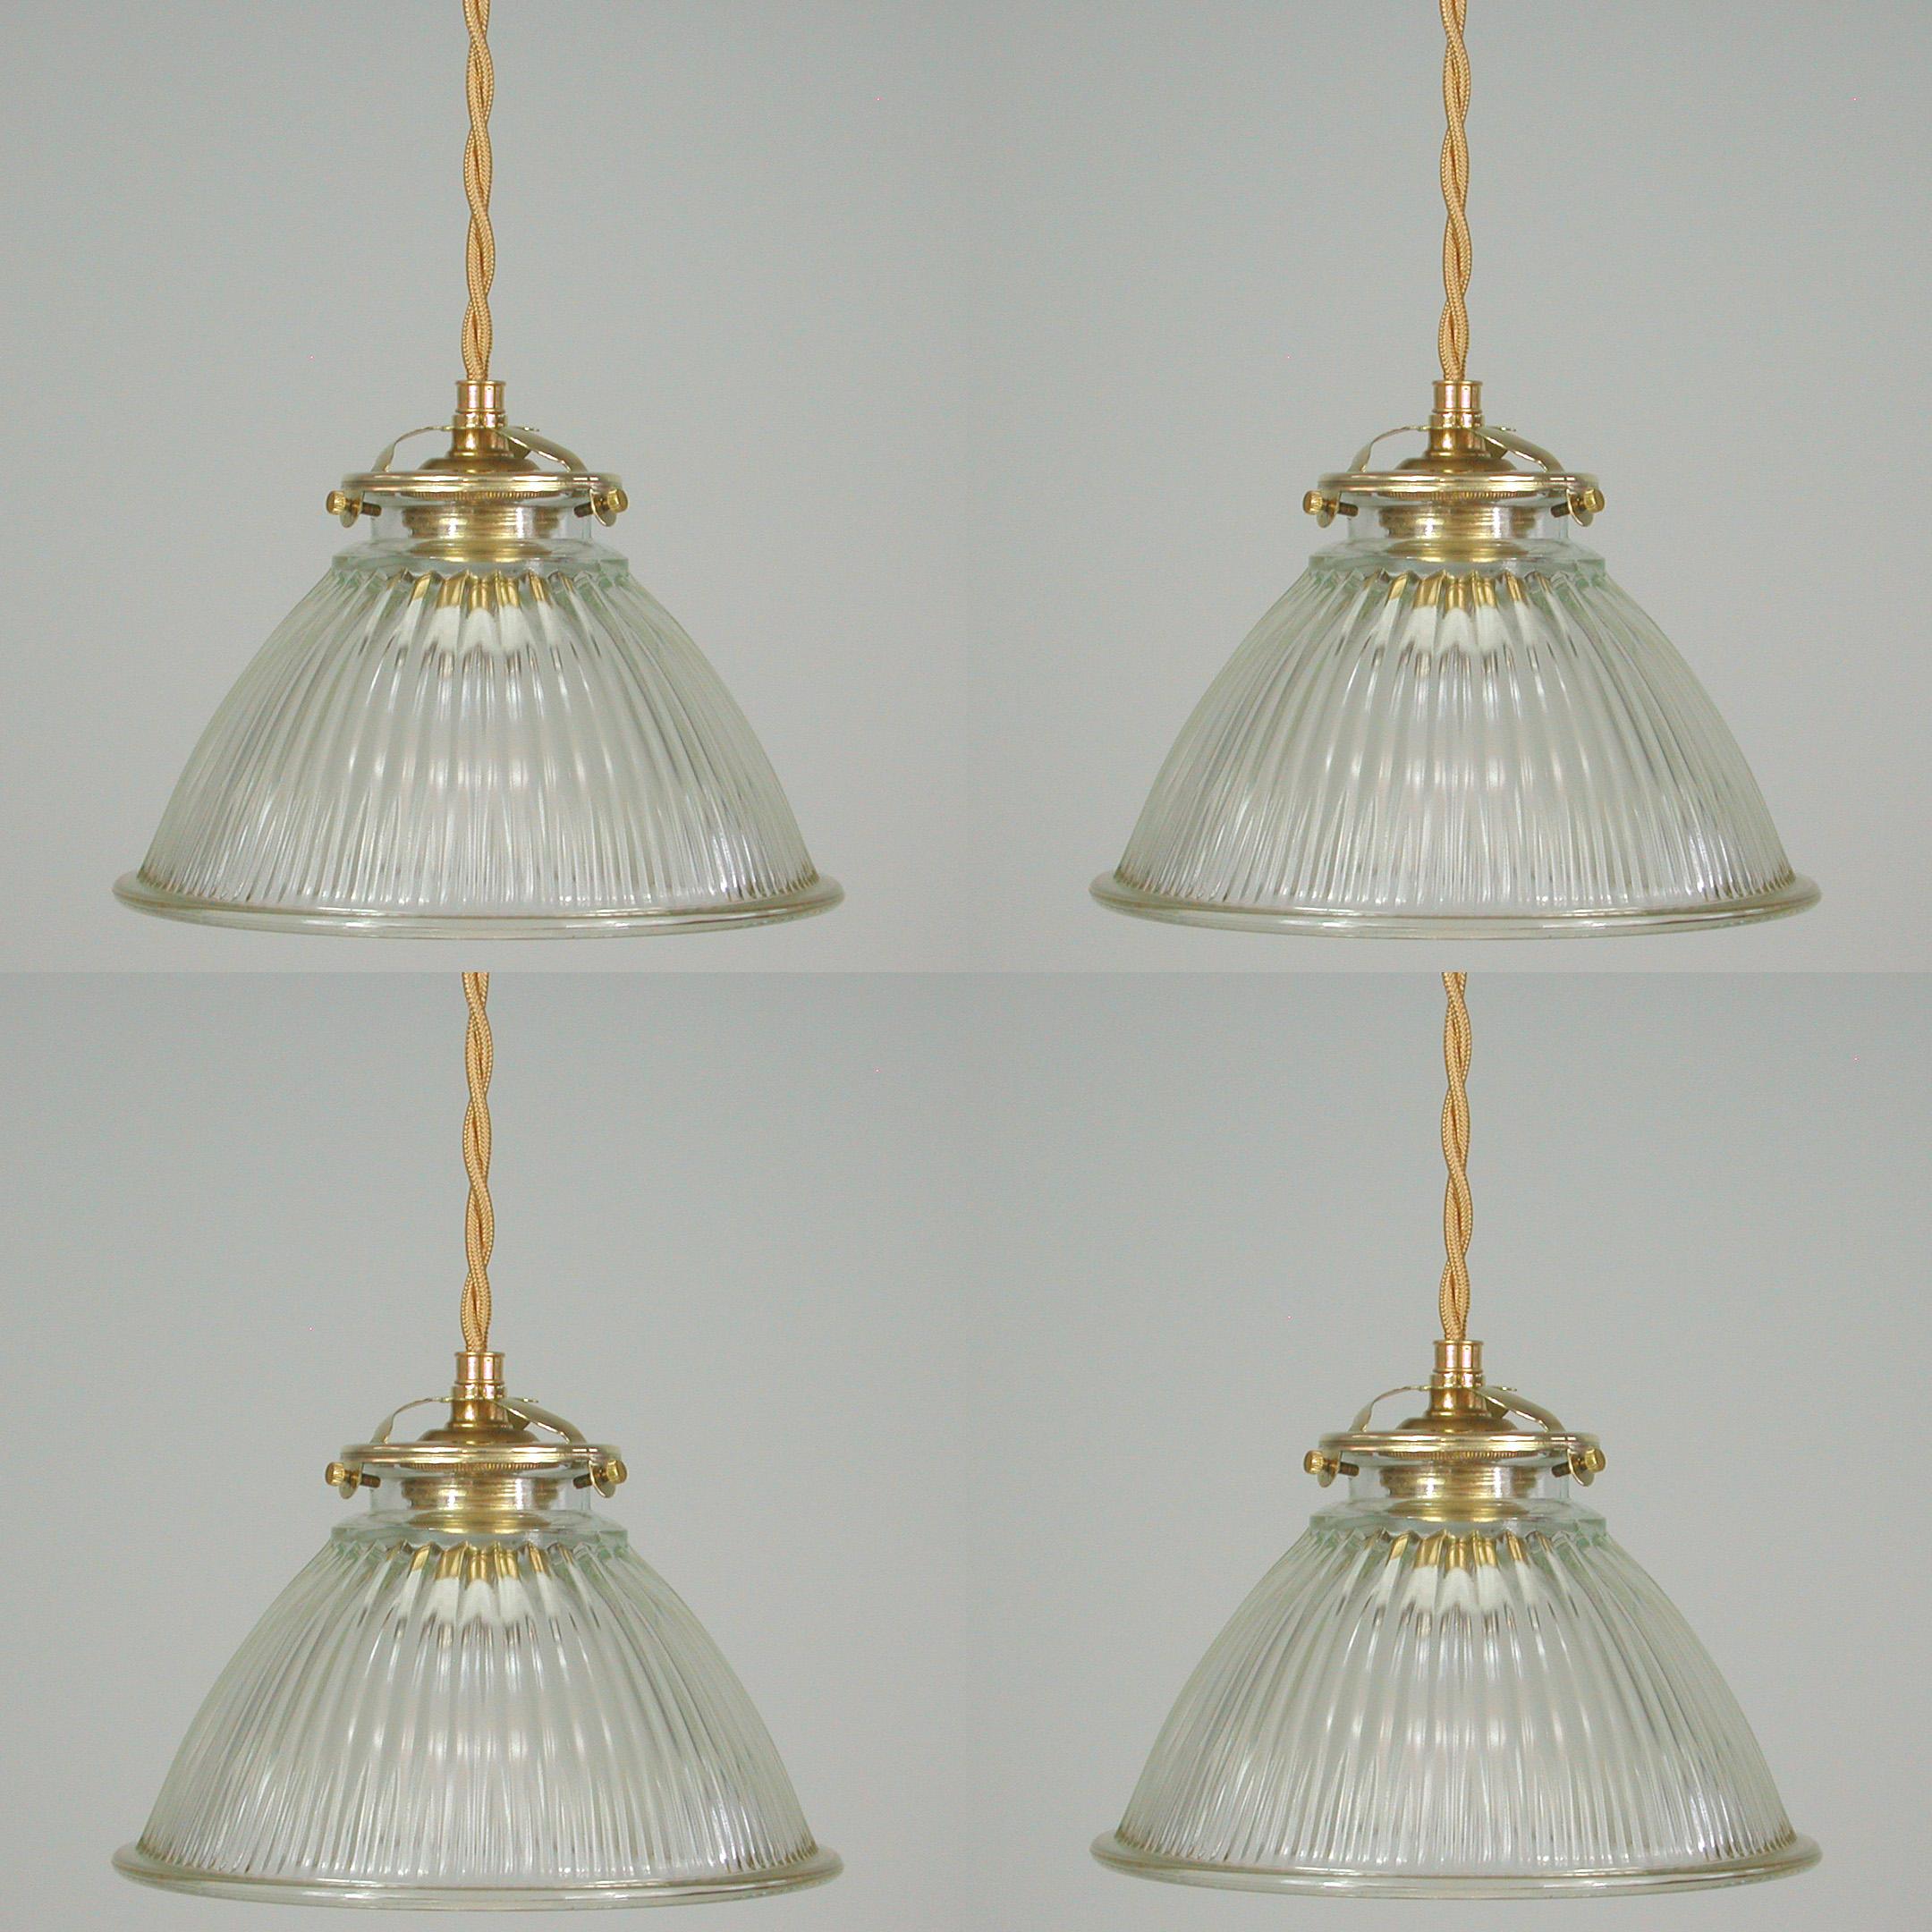 These Art Deco dome shaped pendant lights were made in France in the 1930s to 1940s. They feature a clear prismatic glass Holophane lamp shade and brass glass holder with gold colored fabric wiring.

The glass gives off the best quality light. It